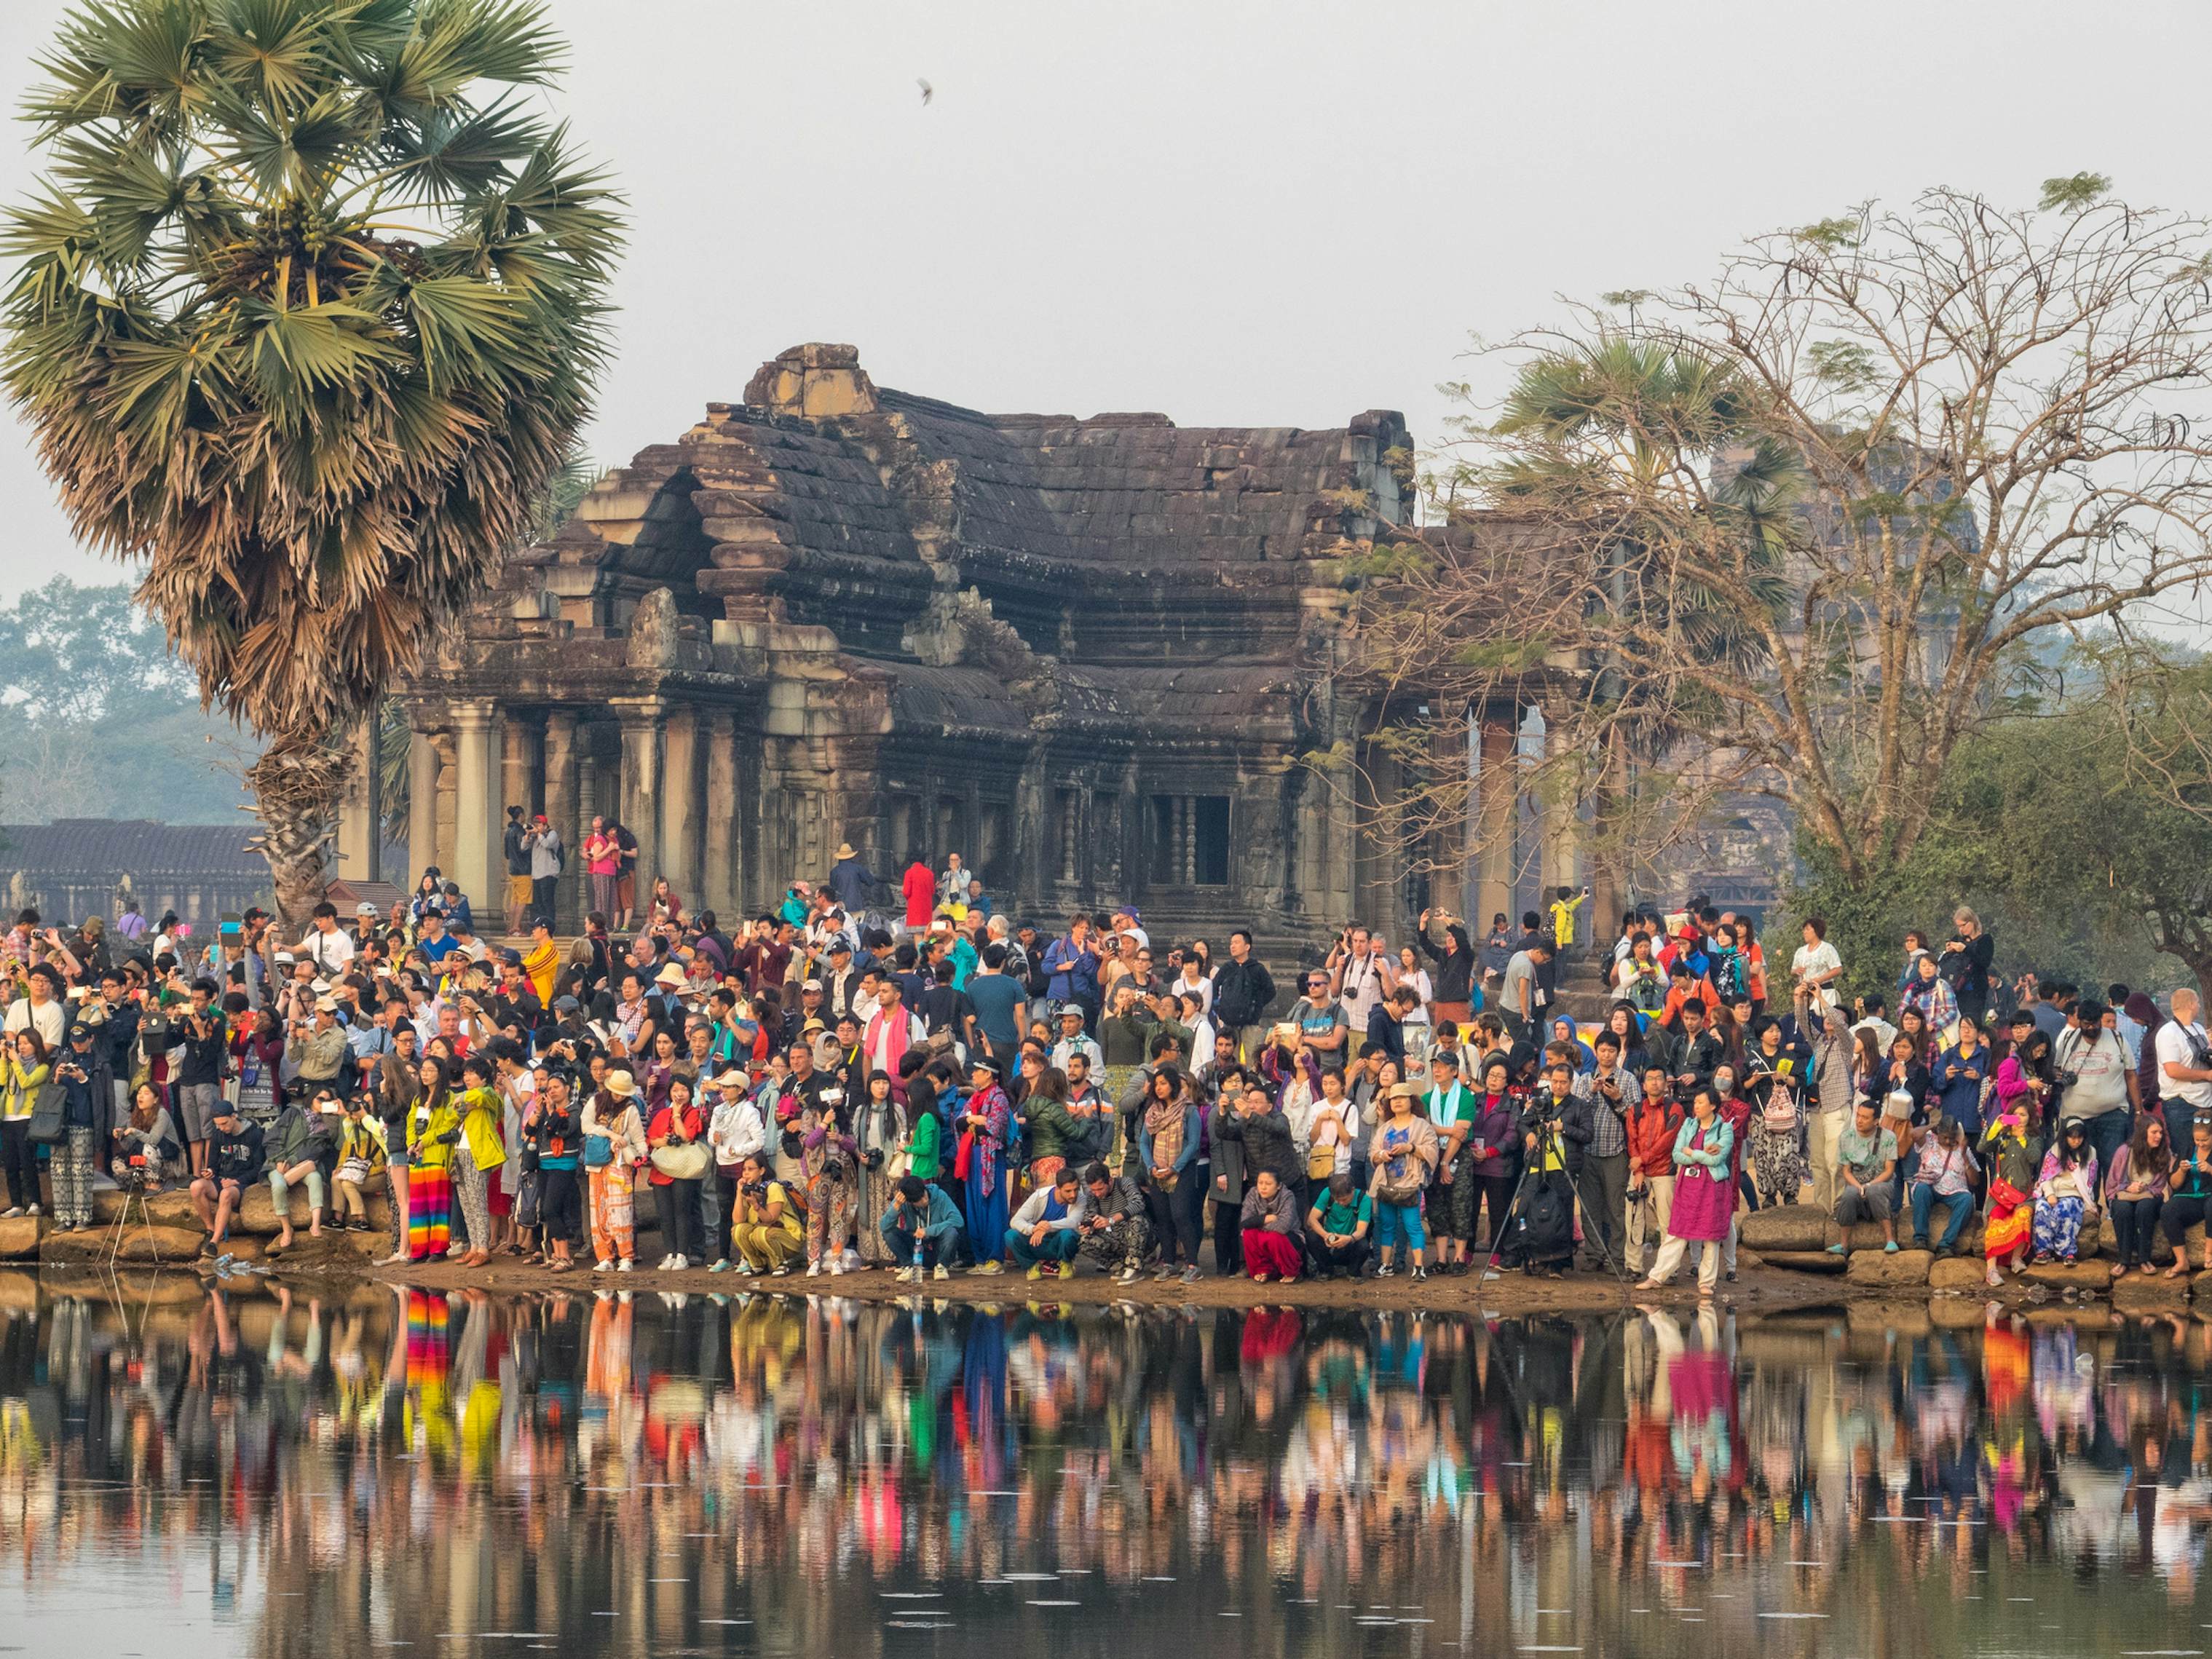 best time to visit vietnam and cambodia lonely planet